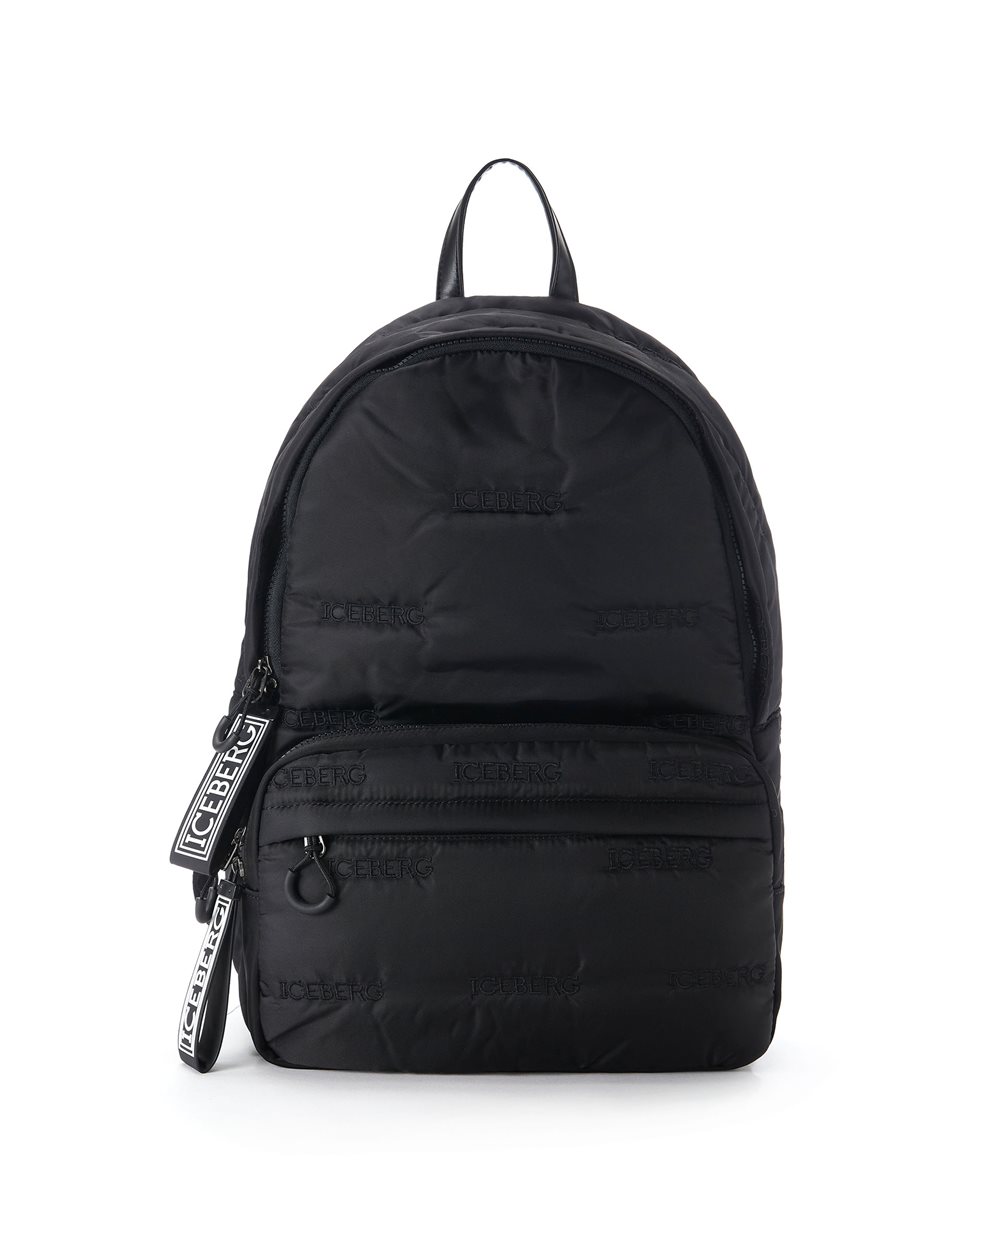 Nylon backpack with allover logo - ( PRIMO STEP IT ) PROMO SALDI UP TO 40% | Iceberg - Official Website